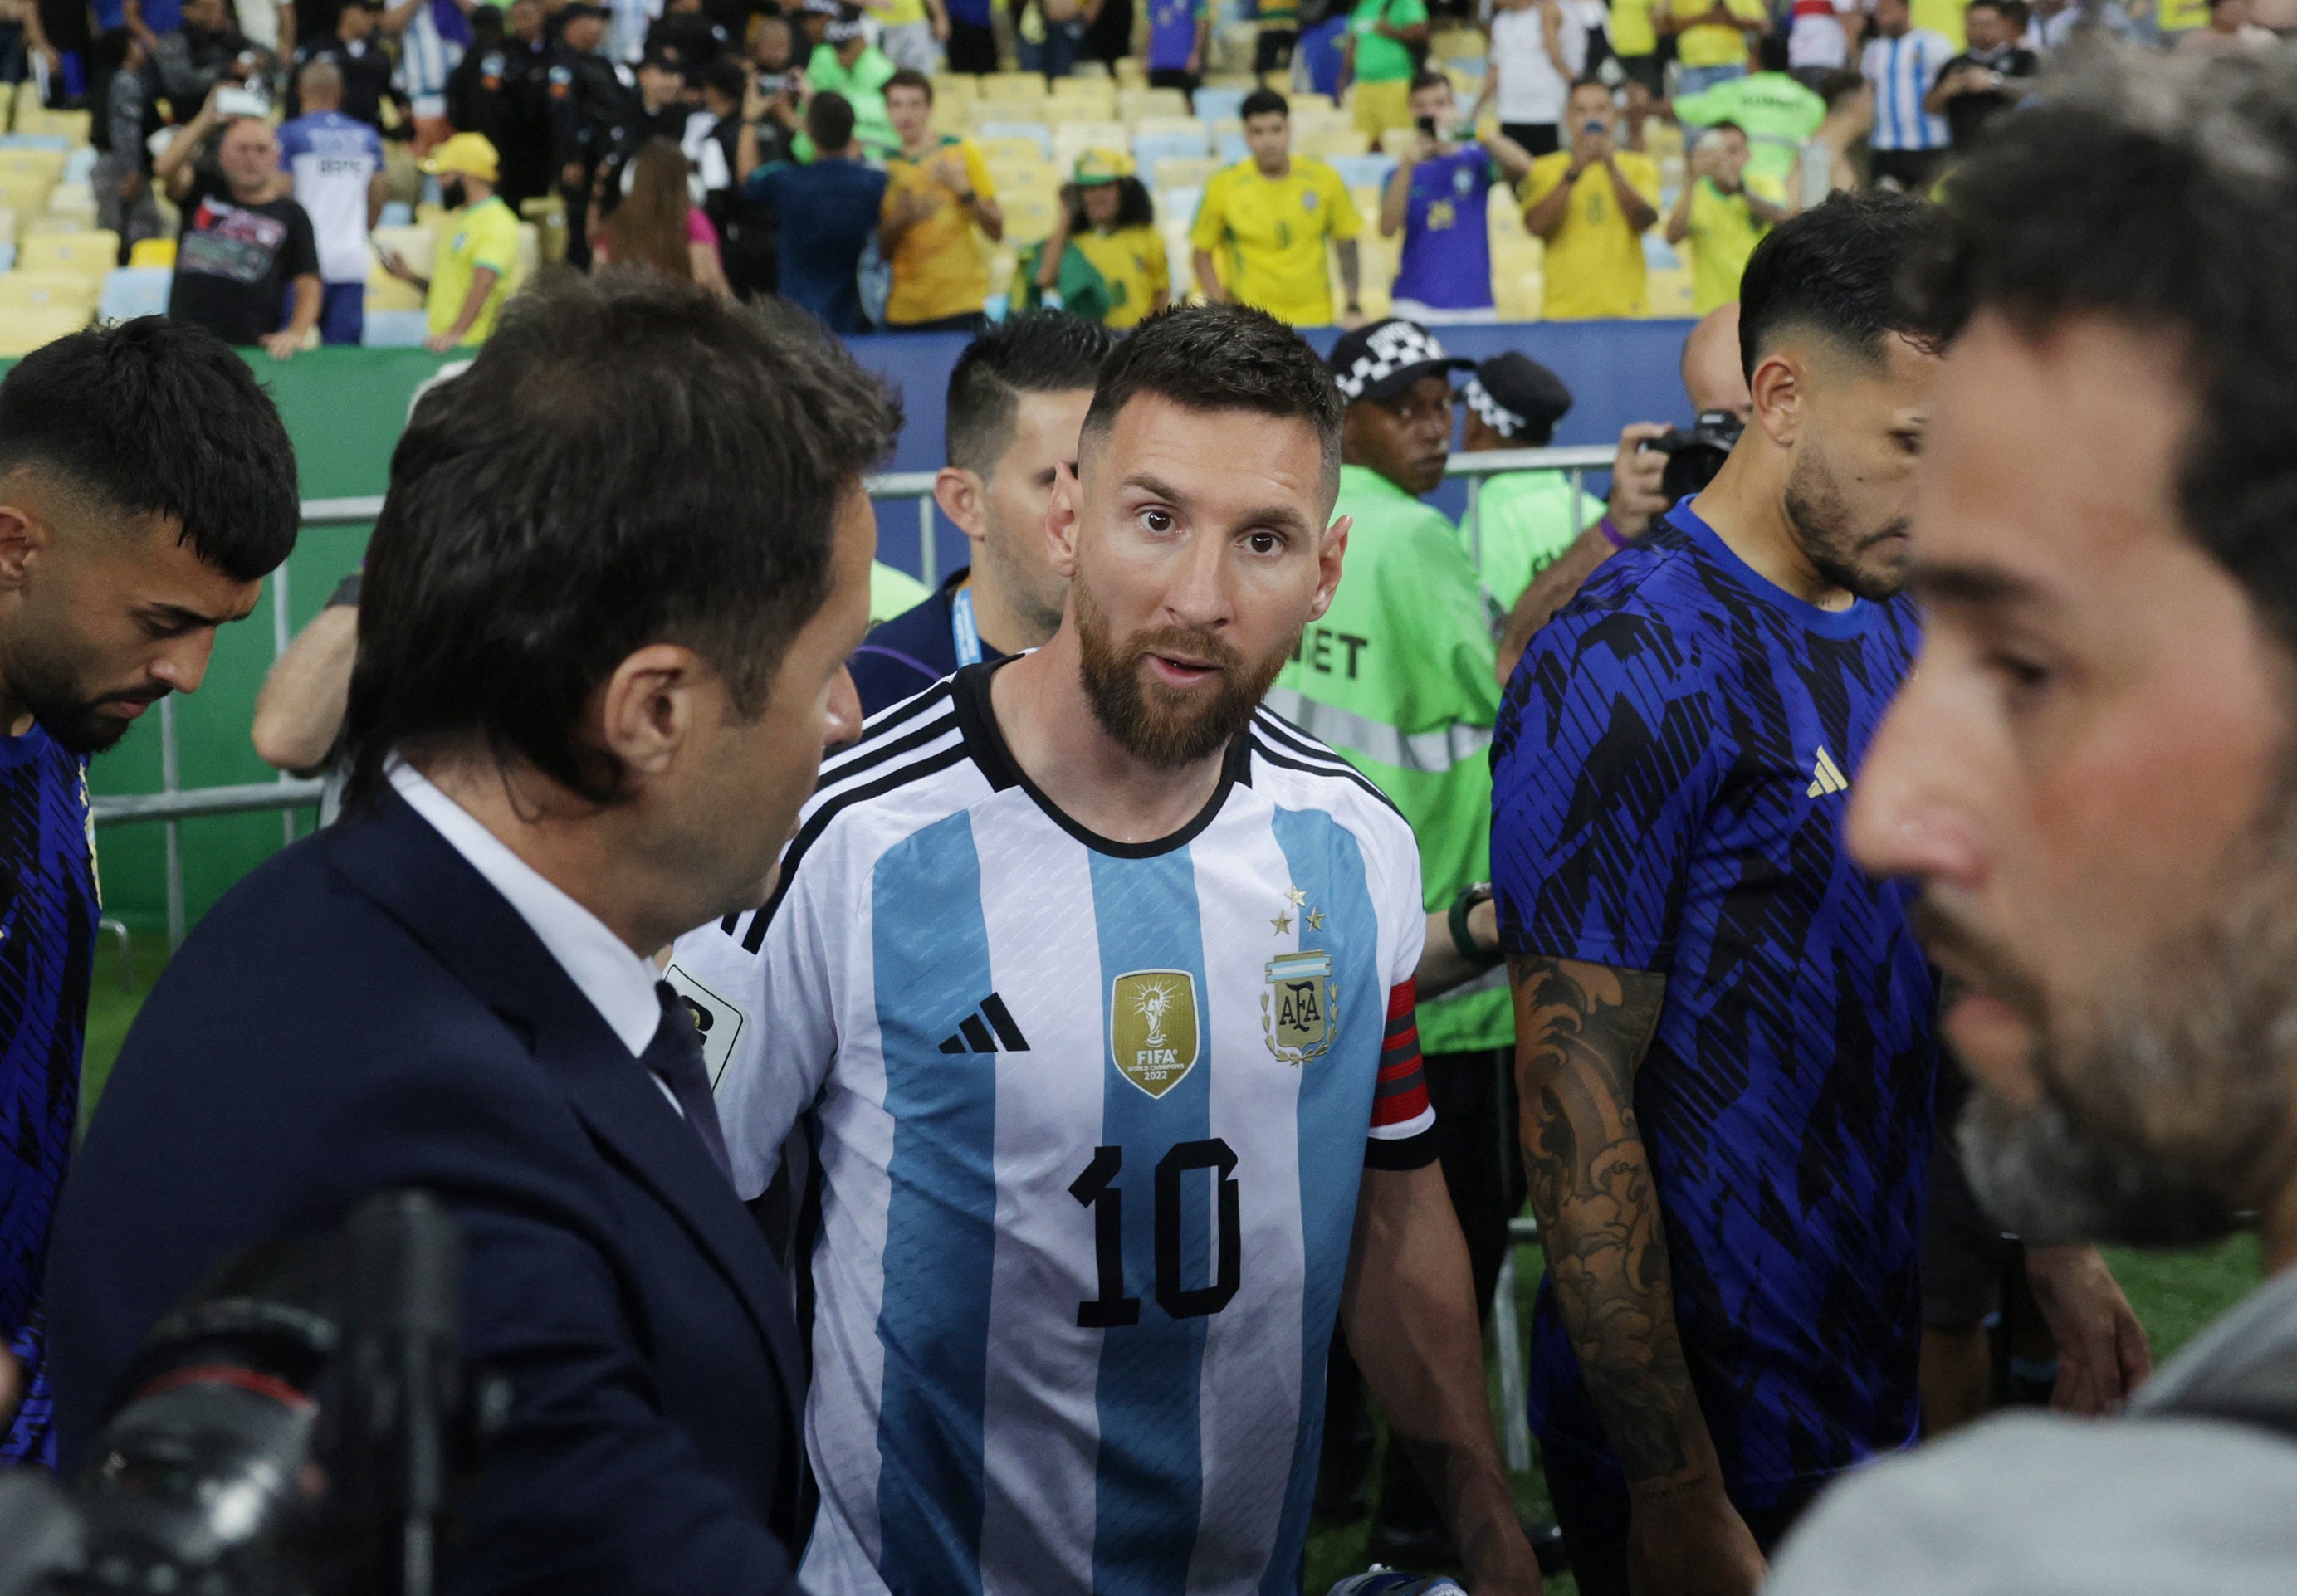 Messi and the Argentina then left the pitch as the match was delayed